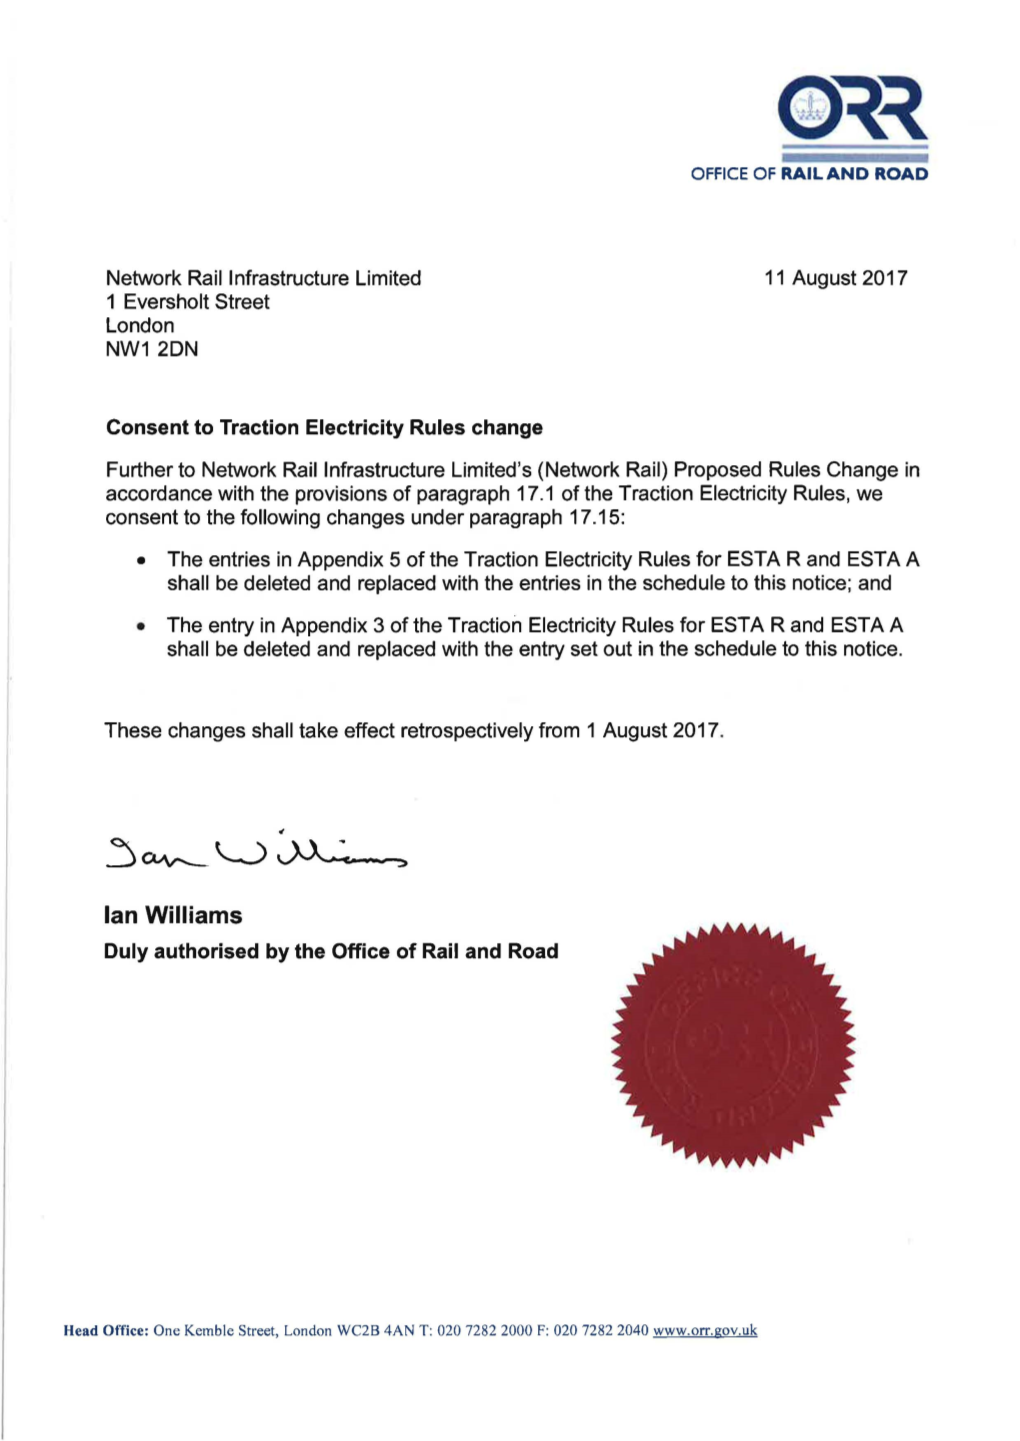 Consent to a Change to the Traction Electricity Rules Network Rail Notice